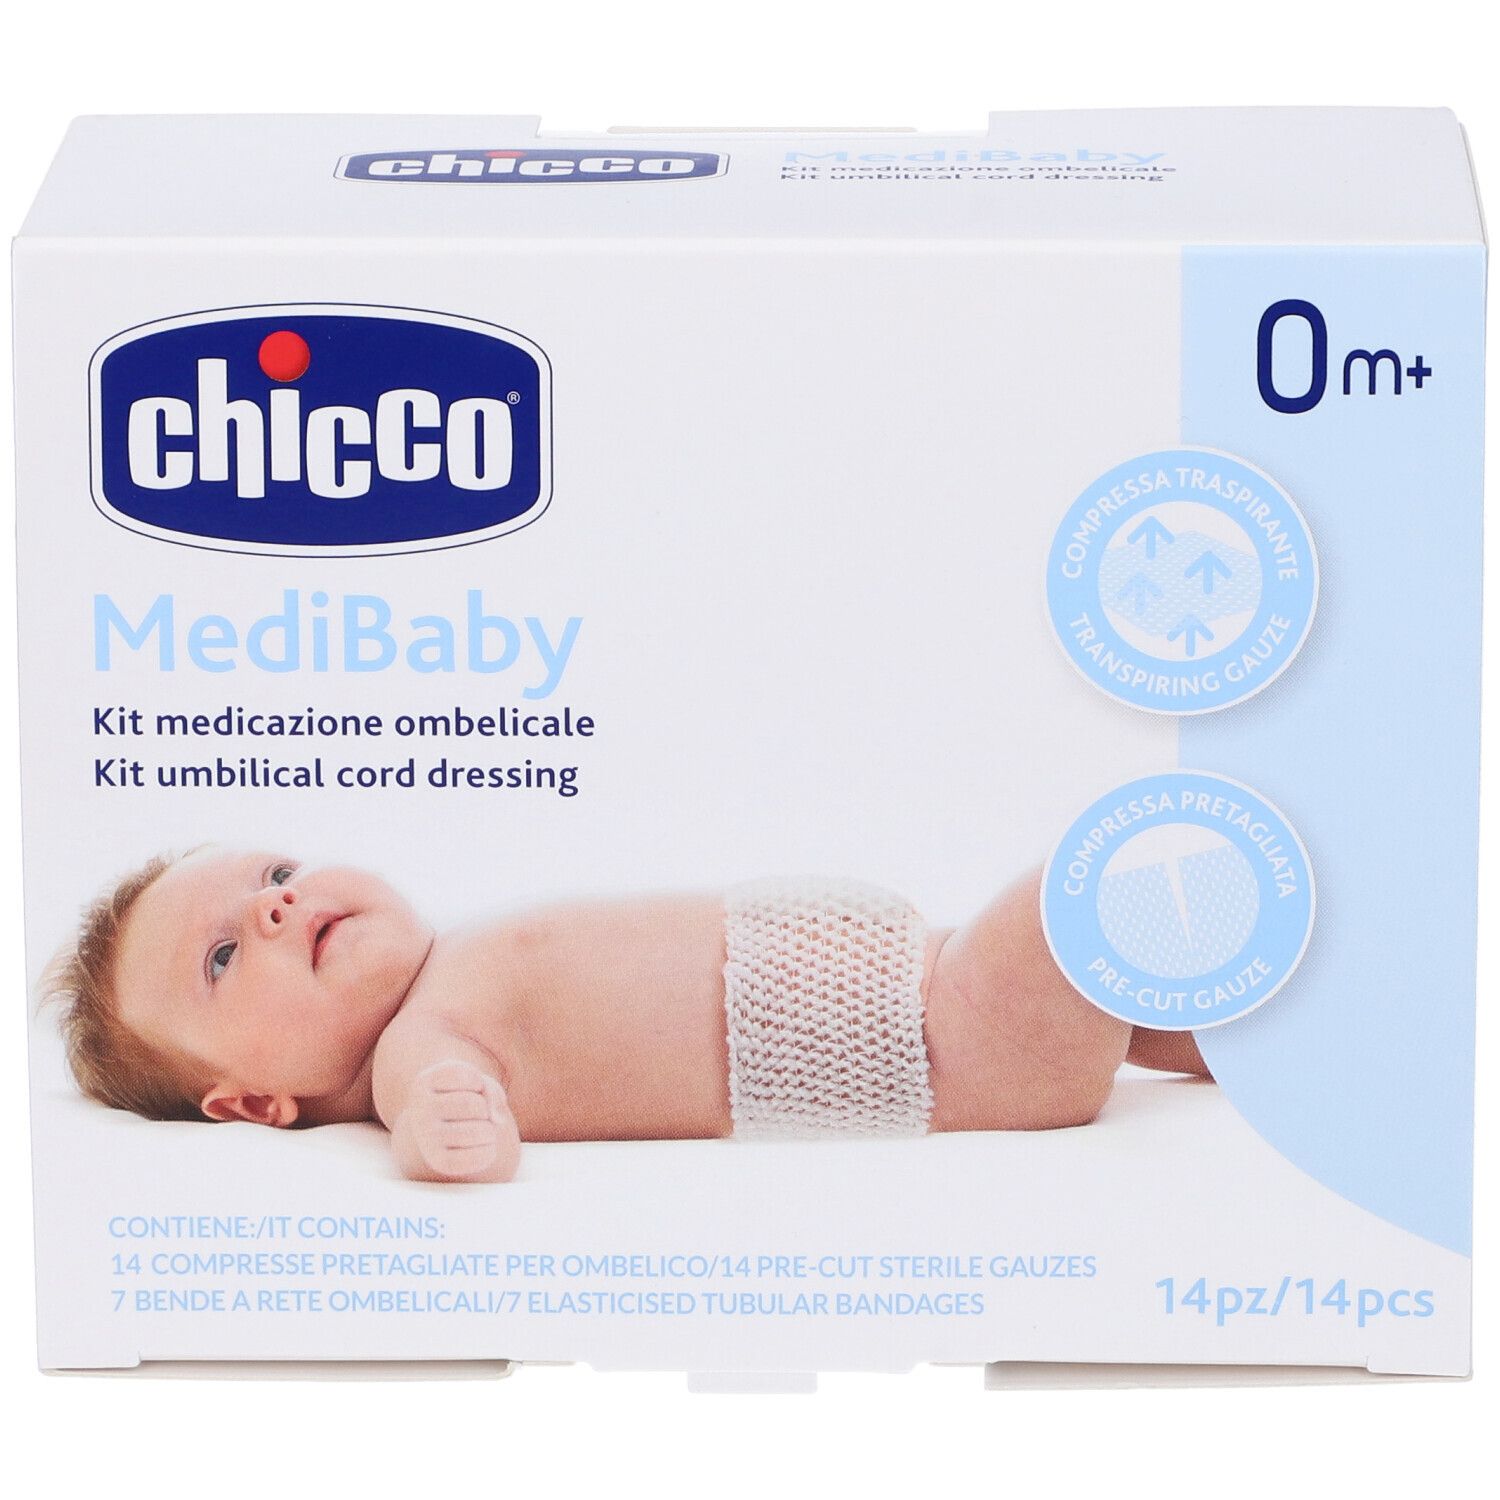 Chicco MediBaby Kit Medicazione Ombelicale 14 Pc